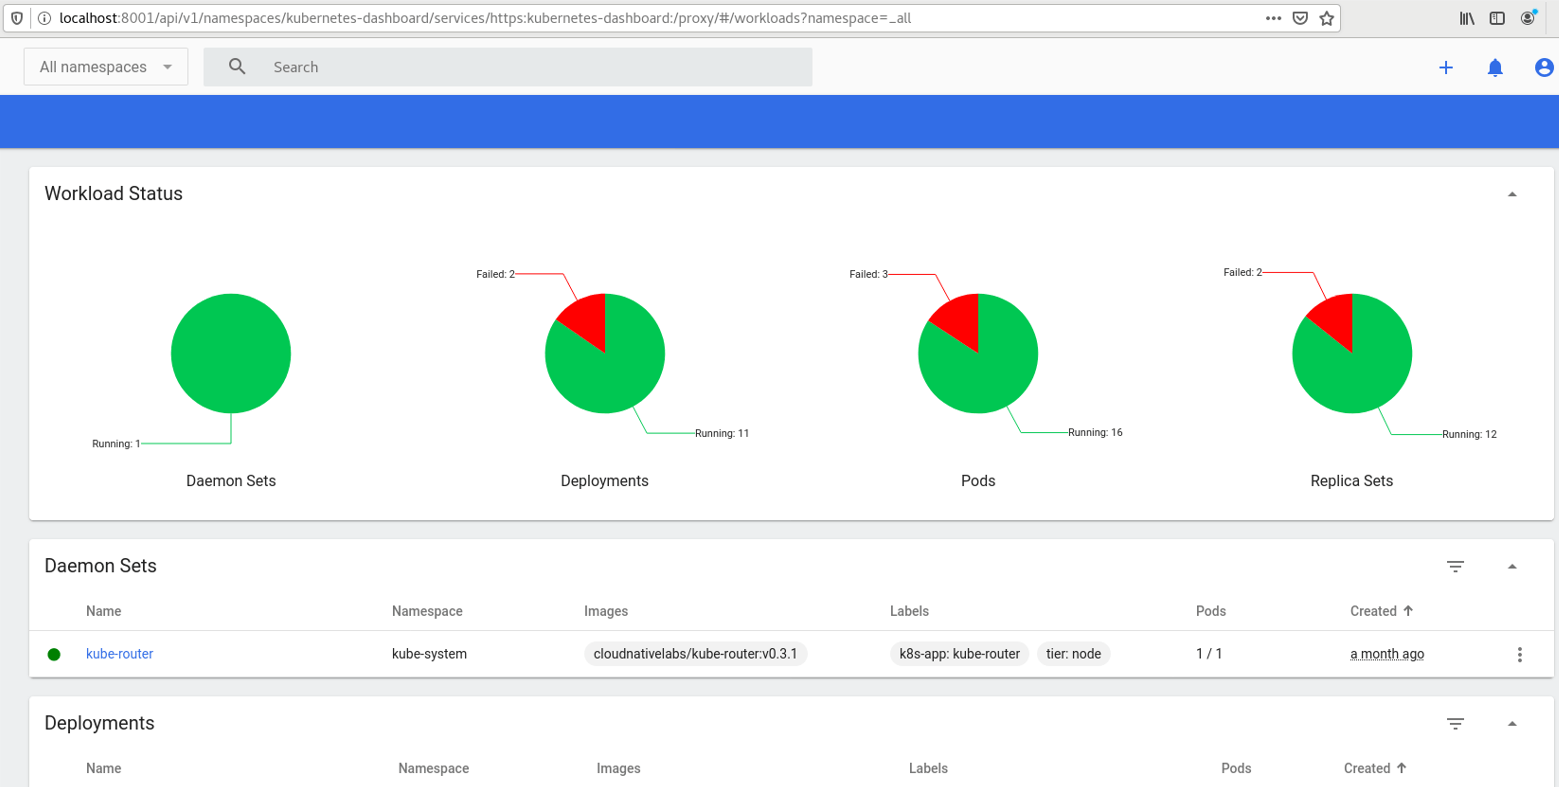 Administrative features in Kubernetes dashboard